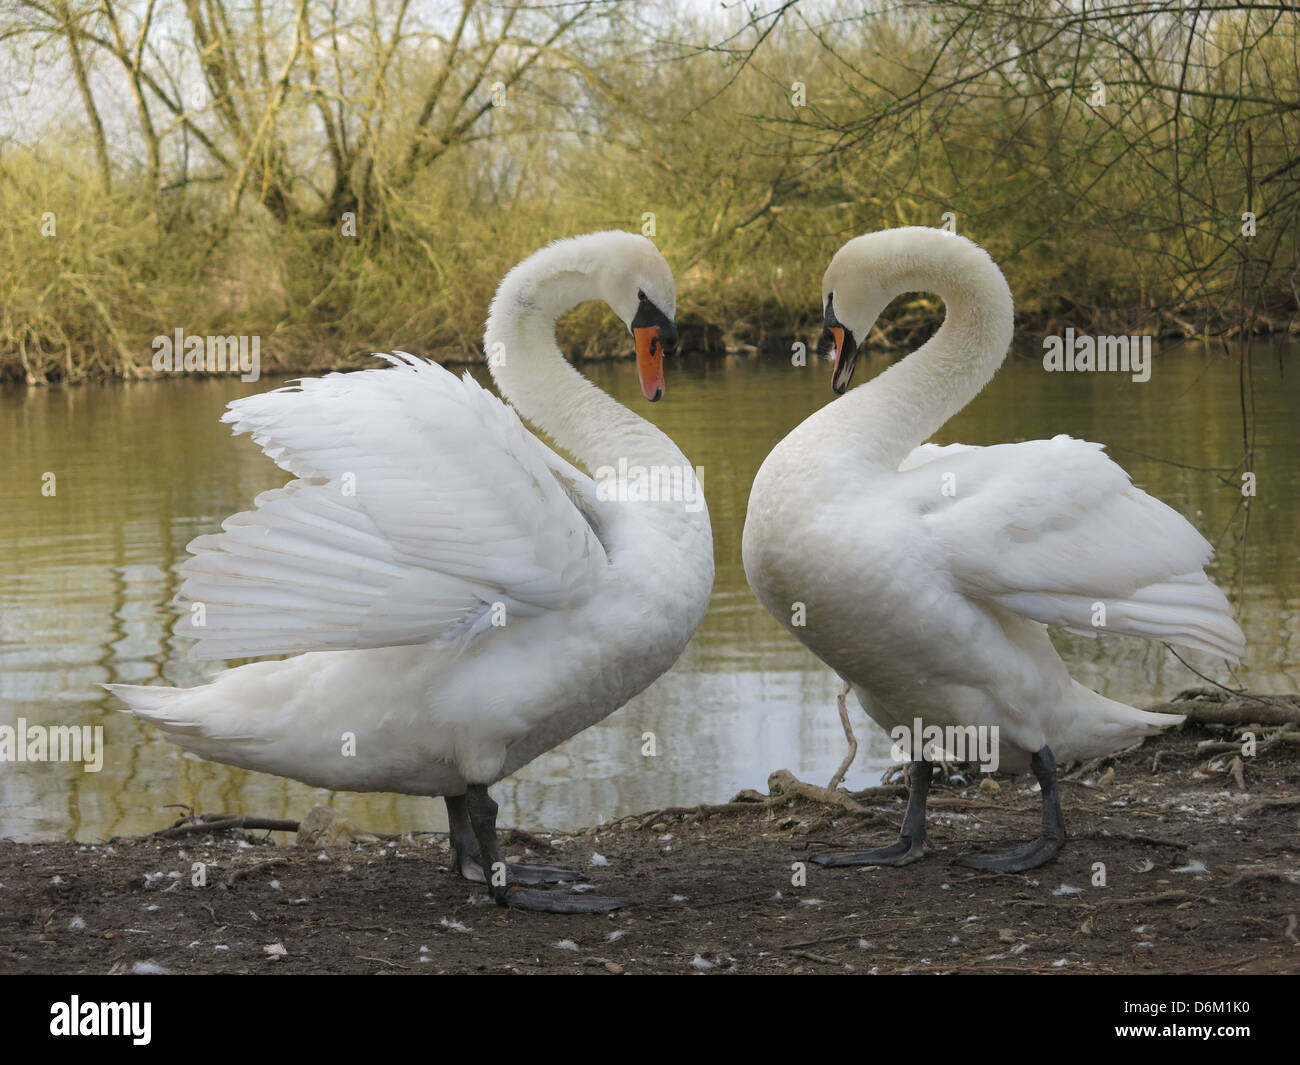 Swans Mating Ritual by The River Thames, Reading, Berkshire. Stock Photo